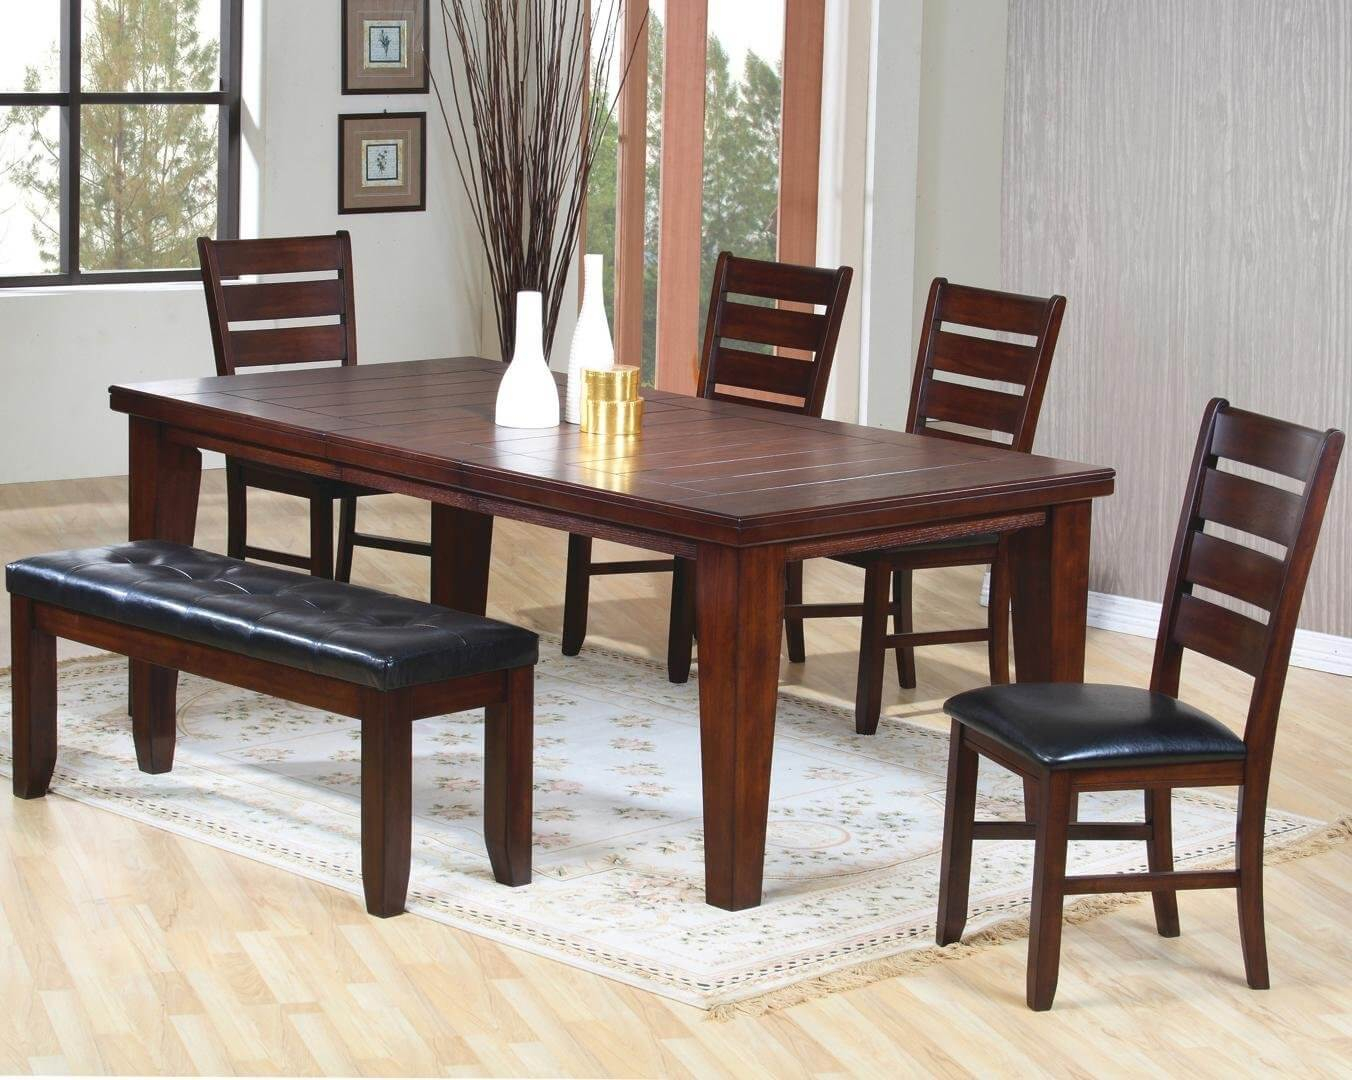 26 Dining Room Sets Big And Small With Bench Seating 2020 in size 1352 X 1080